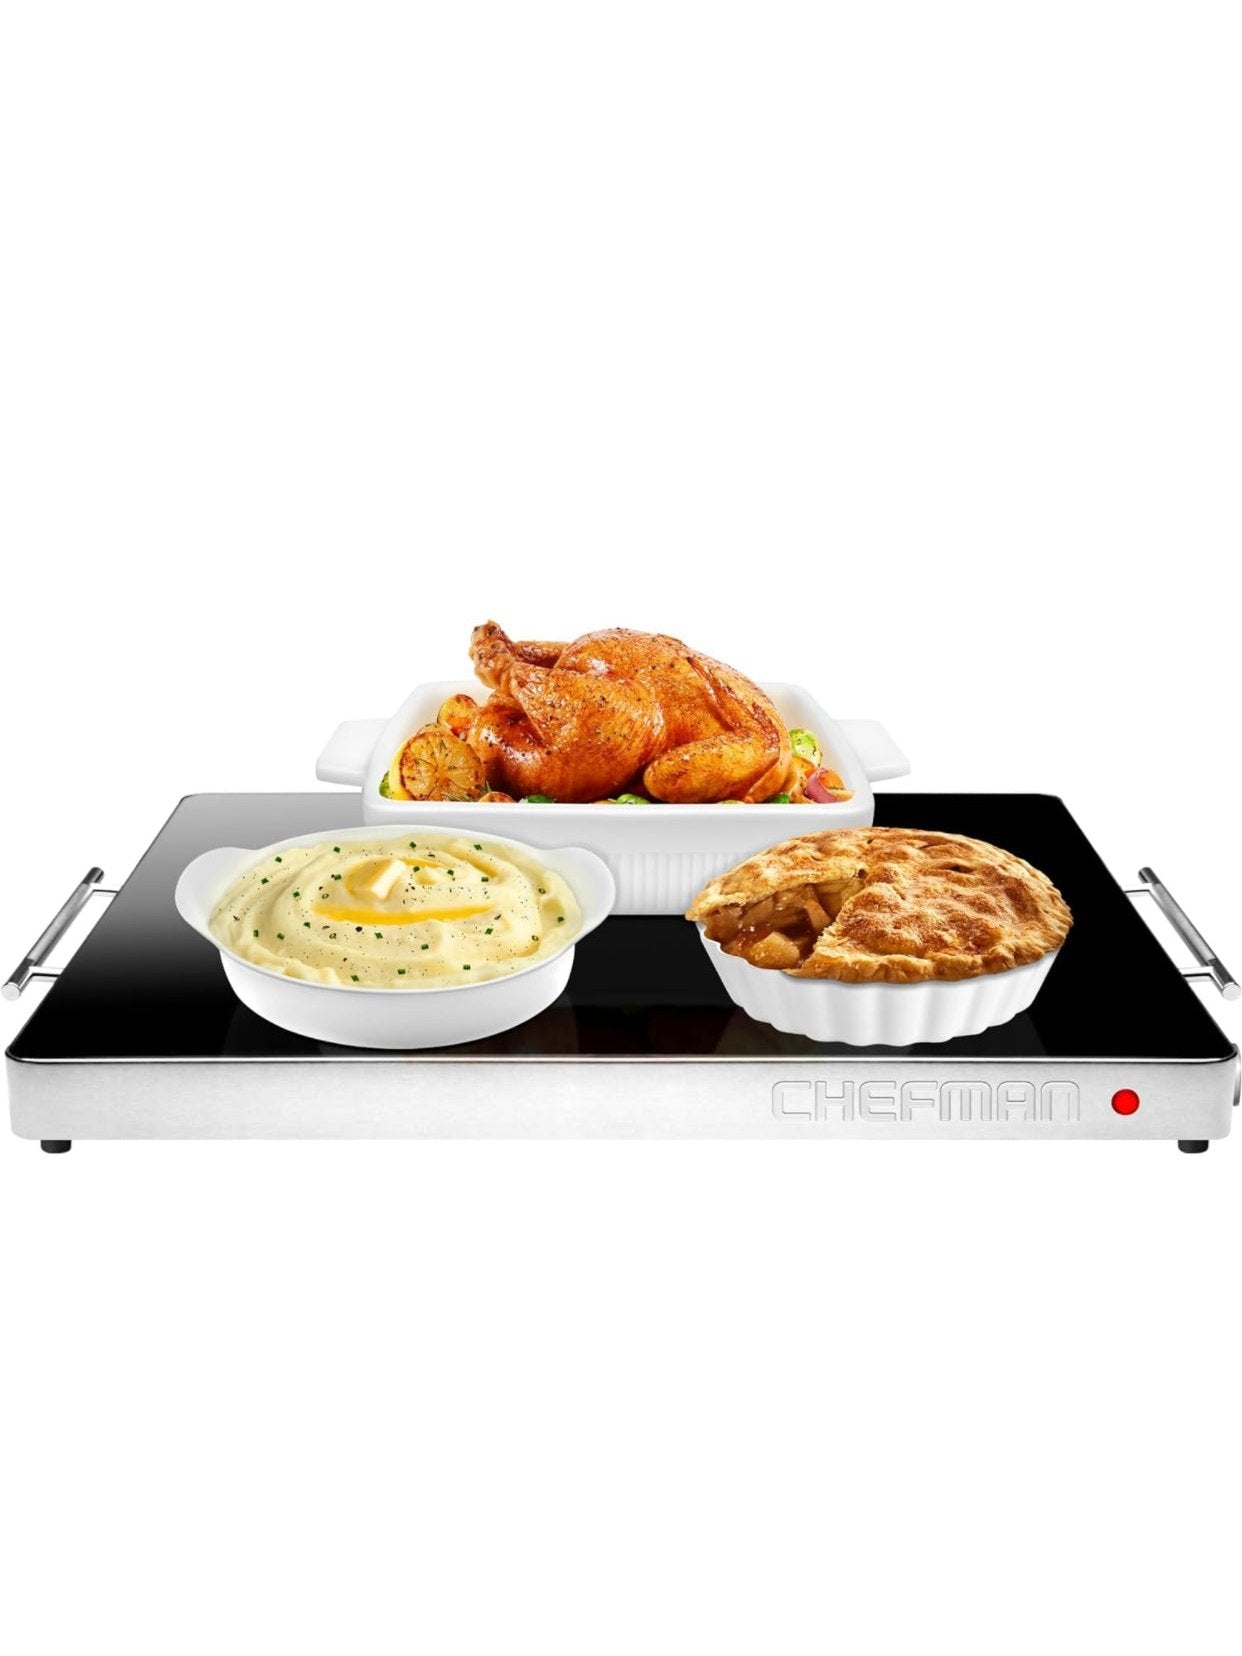 Chefman Electric Warming Tray with Adjustable Temperature Control, Perfect For Buffets, Restaurants, Parties, Events, and Home Dinners, Glass Top Extra Large 21” x 16” Surface Keeps Food Hot – Black